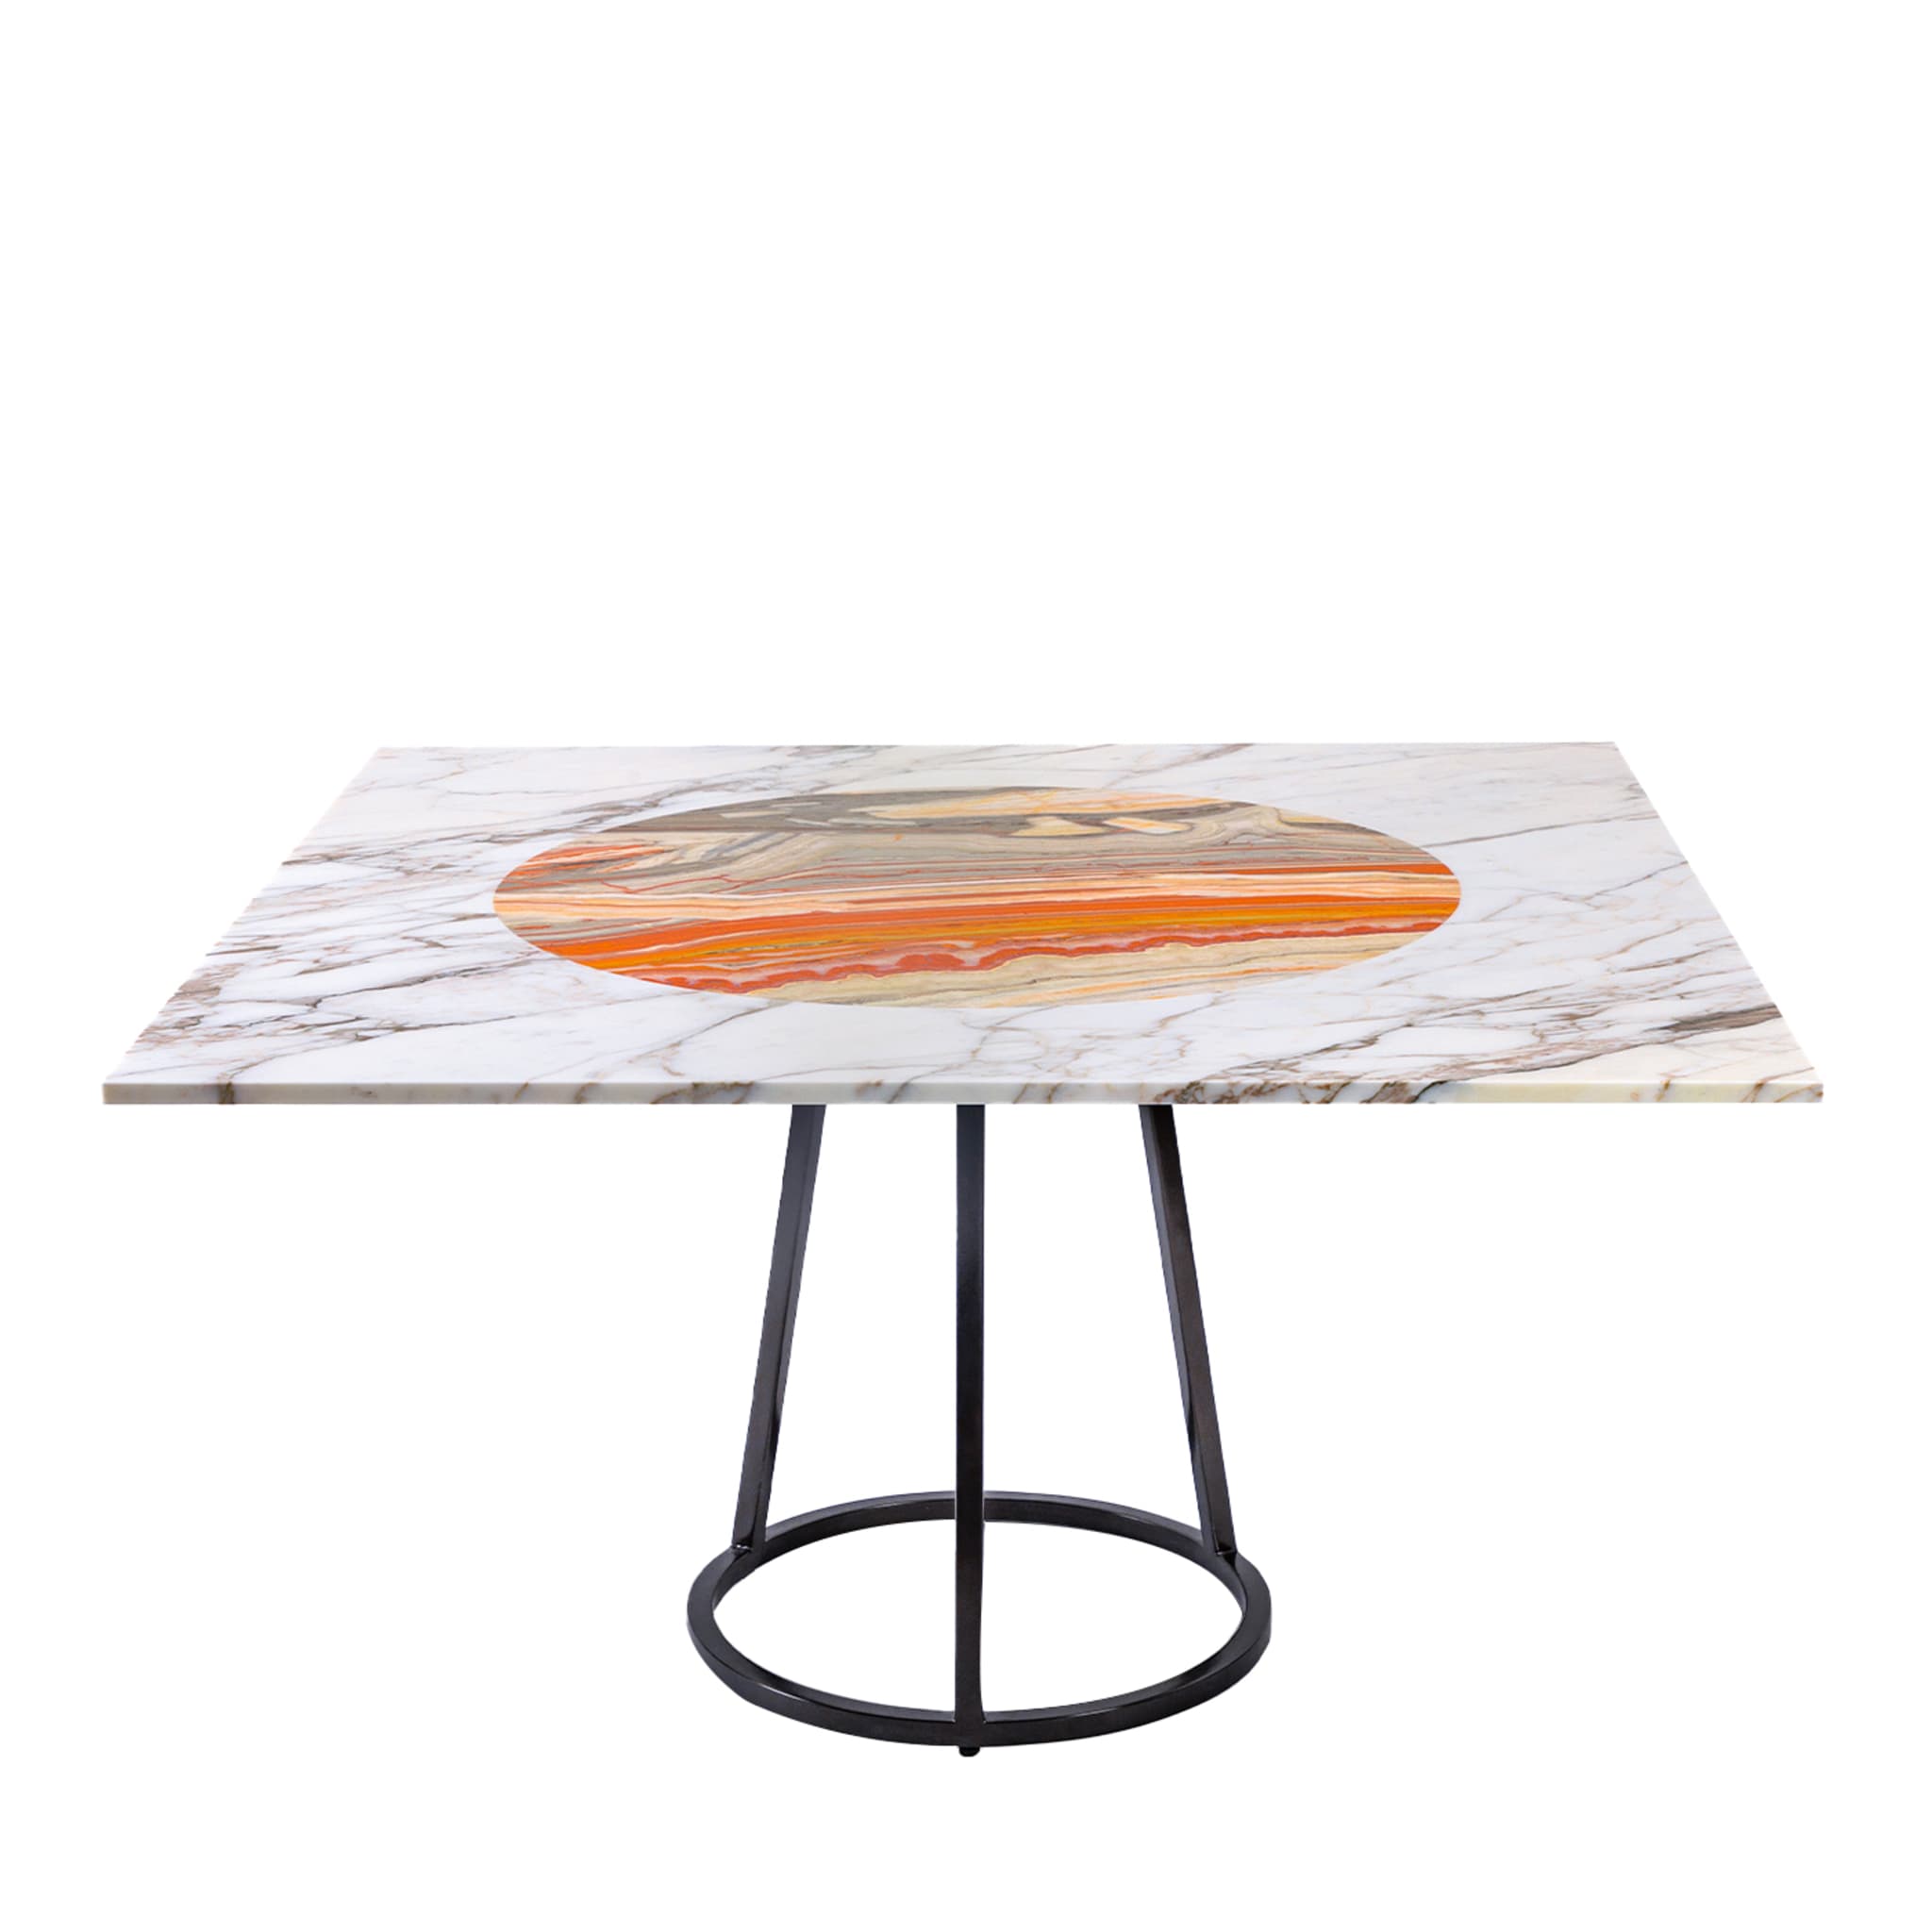 Pantheon Square Polychrome Table by Maarten De Ceulaer - Main view